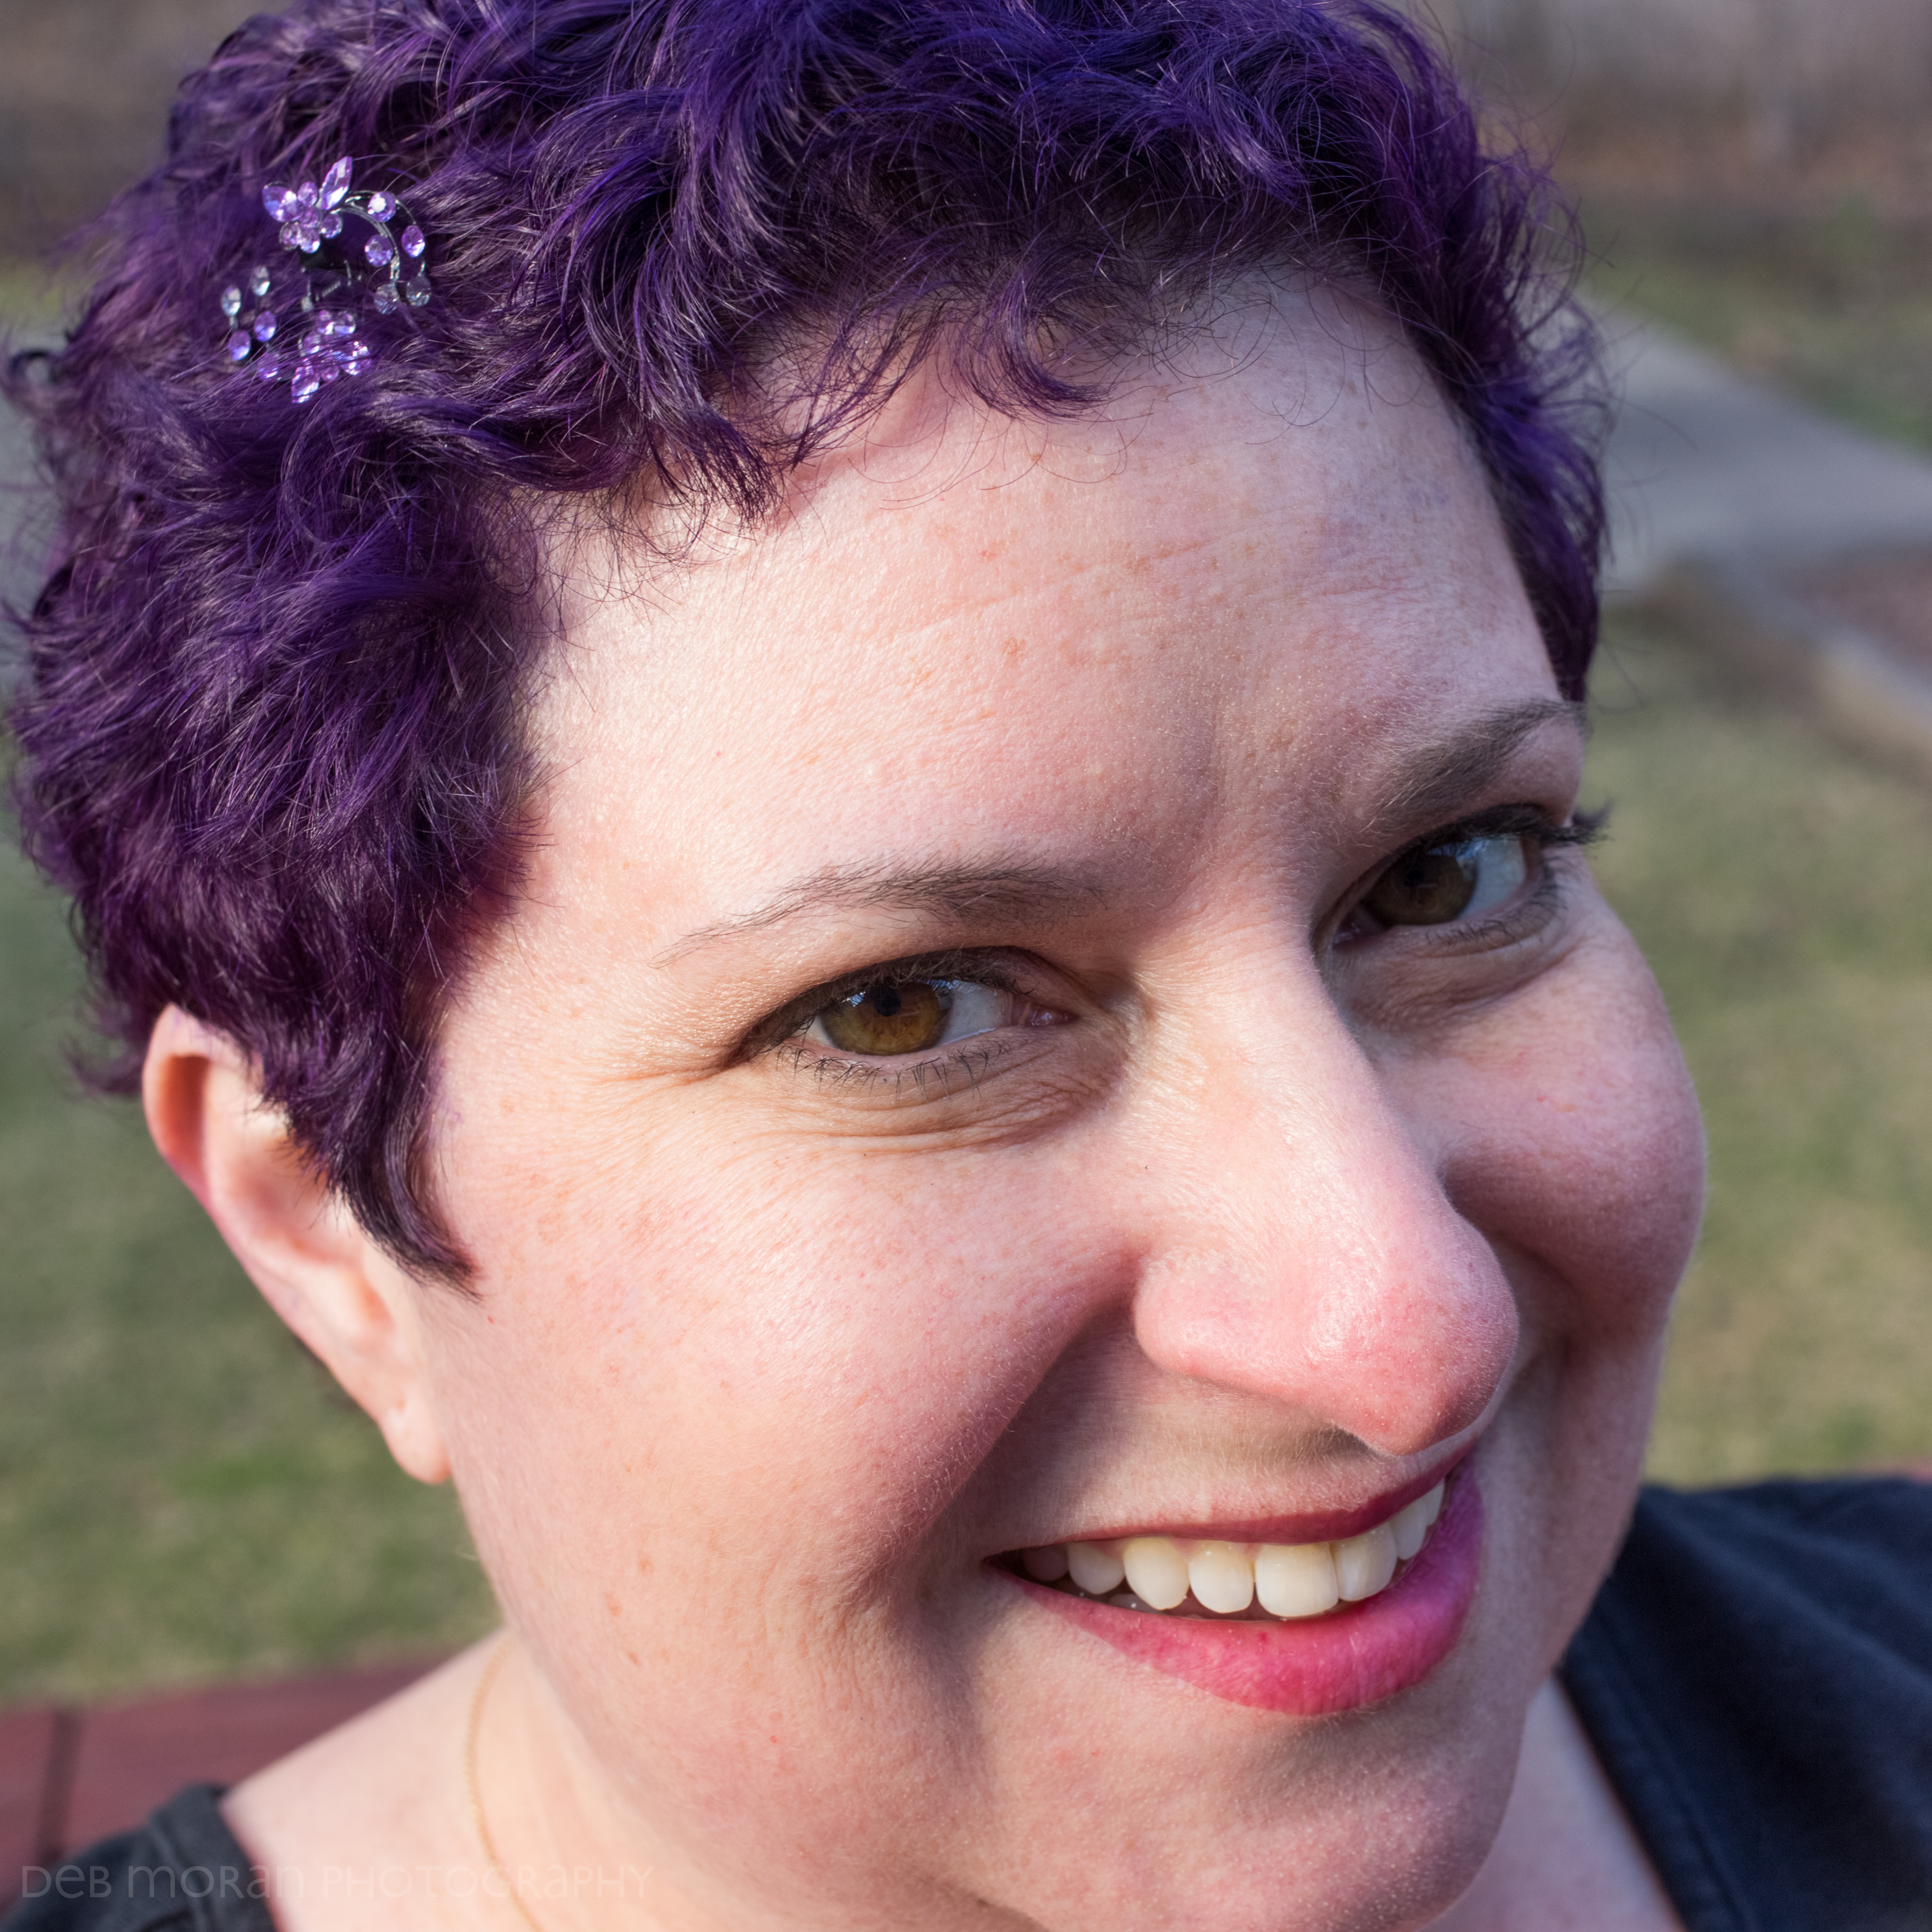 The Ptale of the Purple Pixie